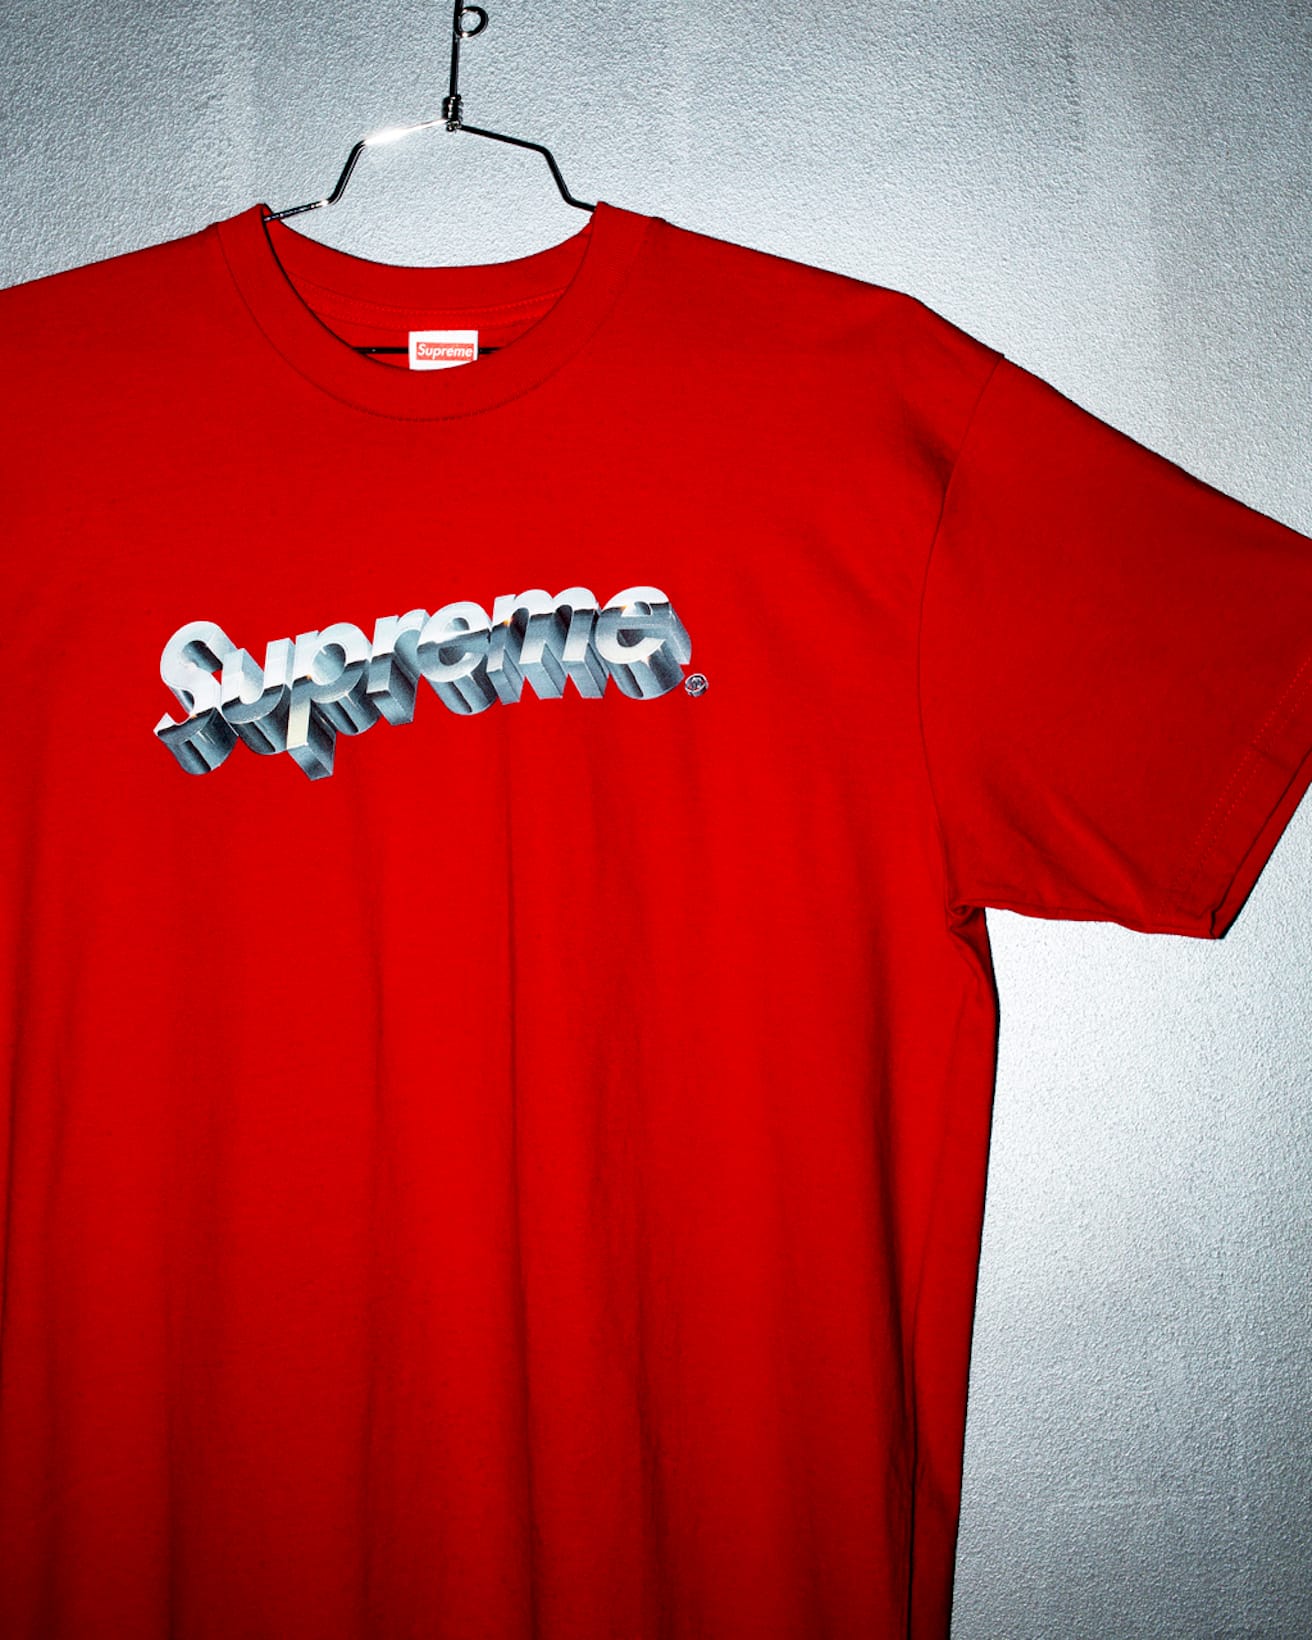 supreme shirt white and red